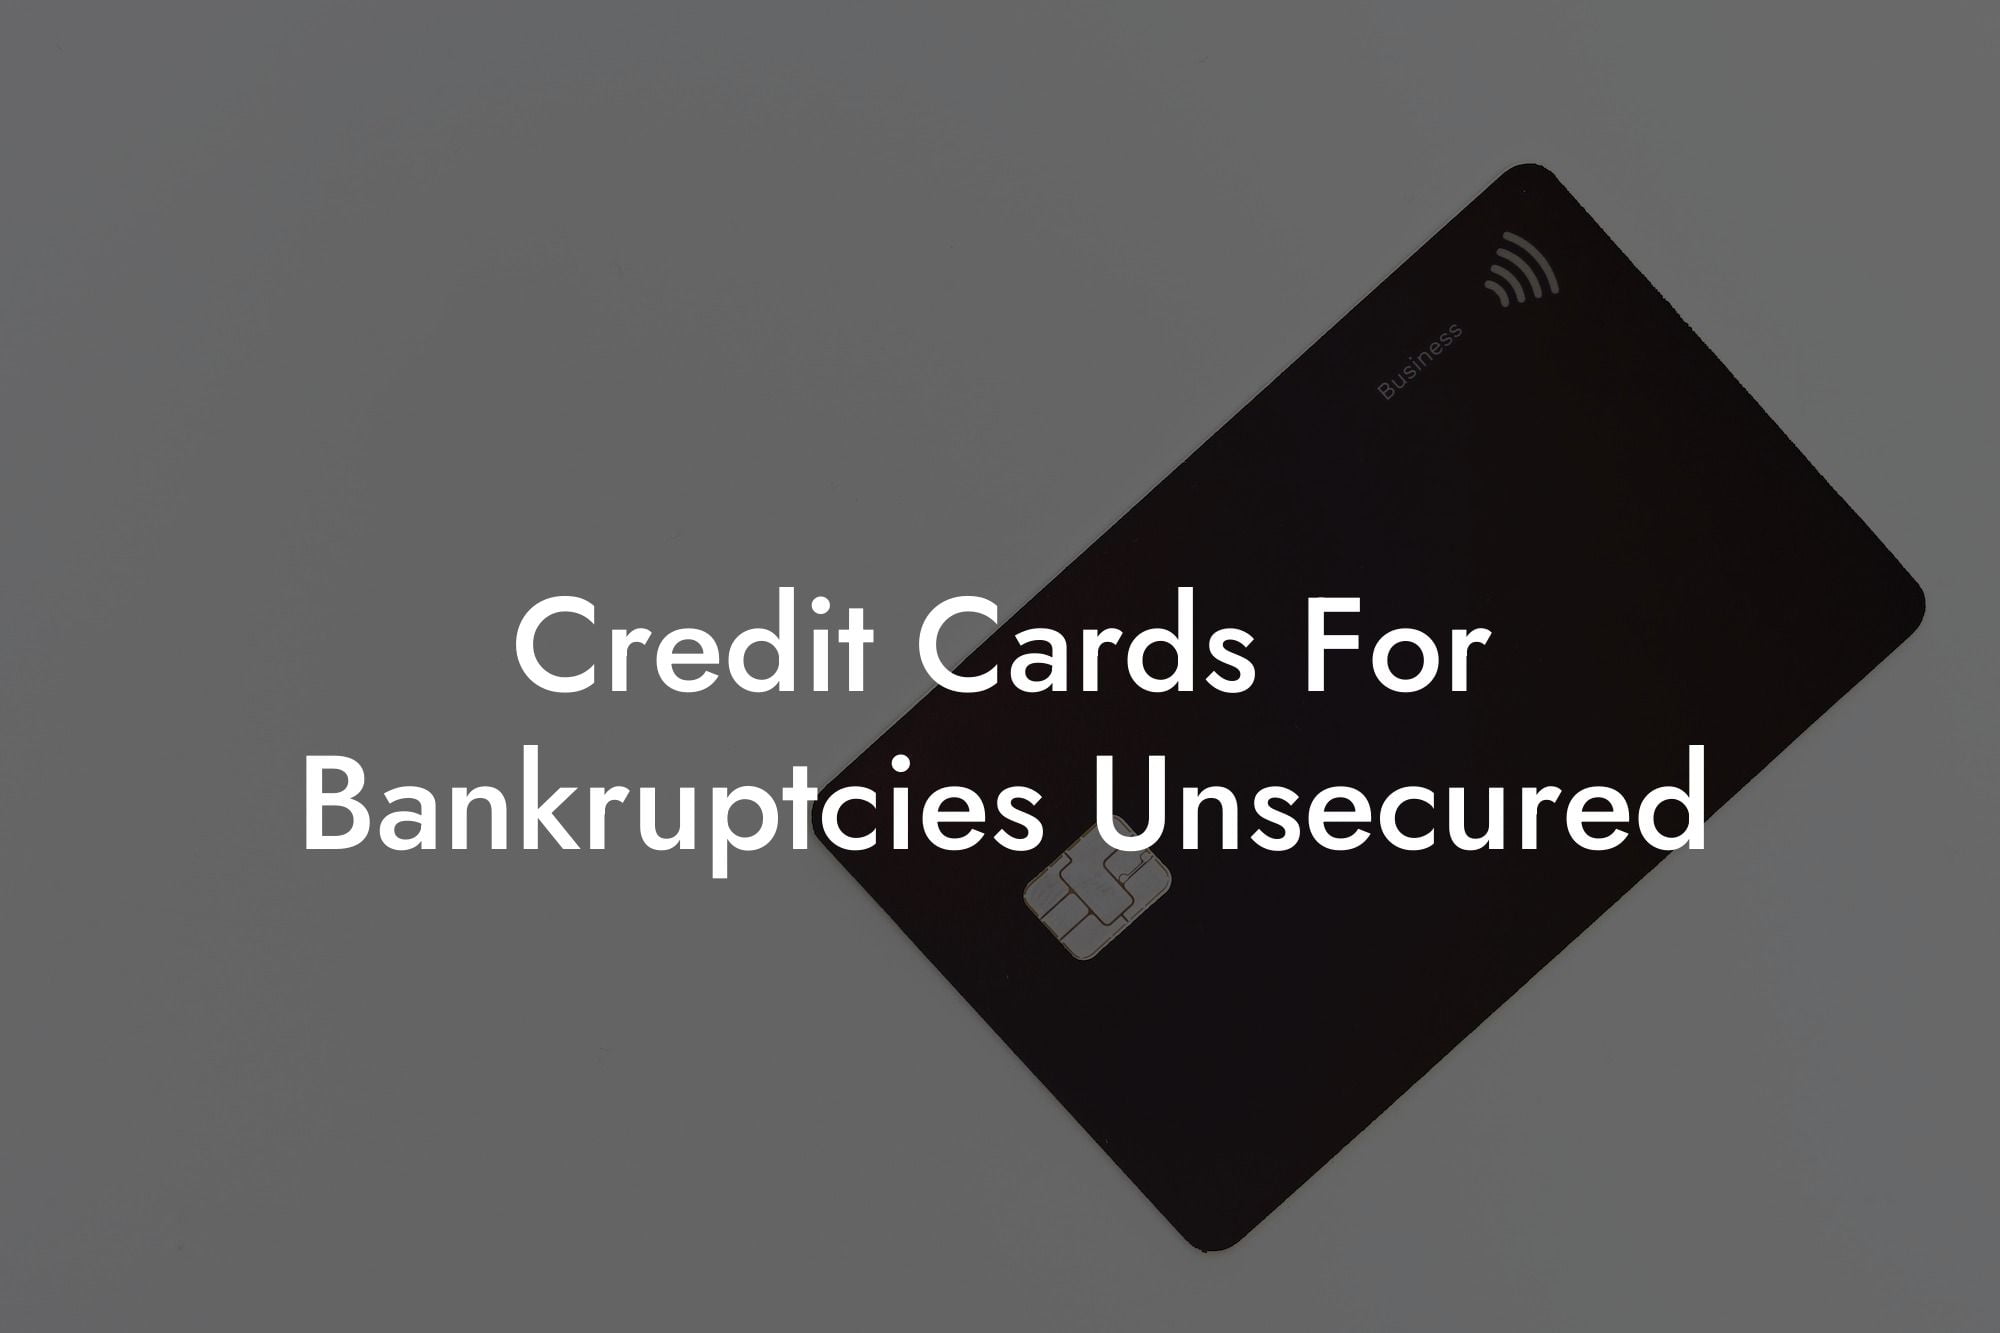 Credit Cards For Bankruptcies Unsecured